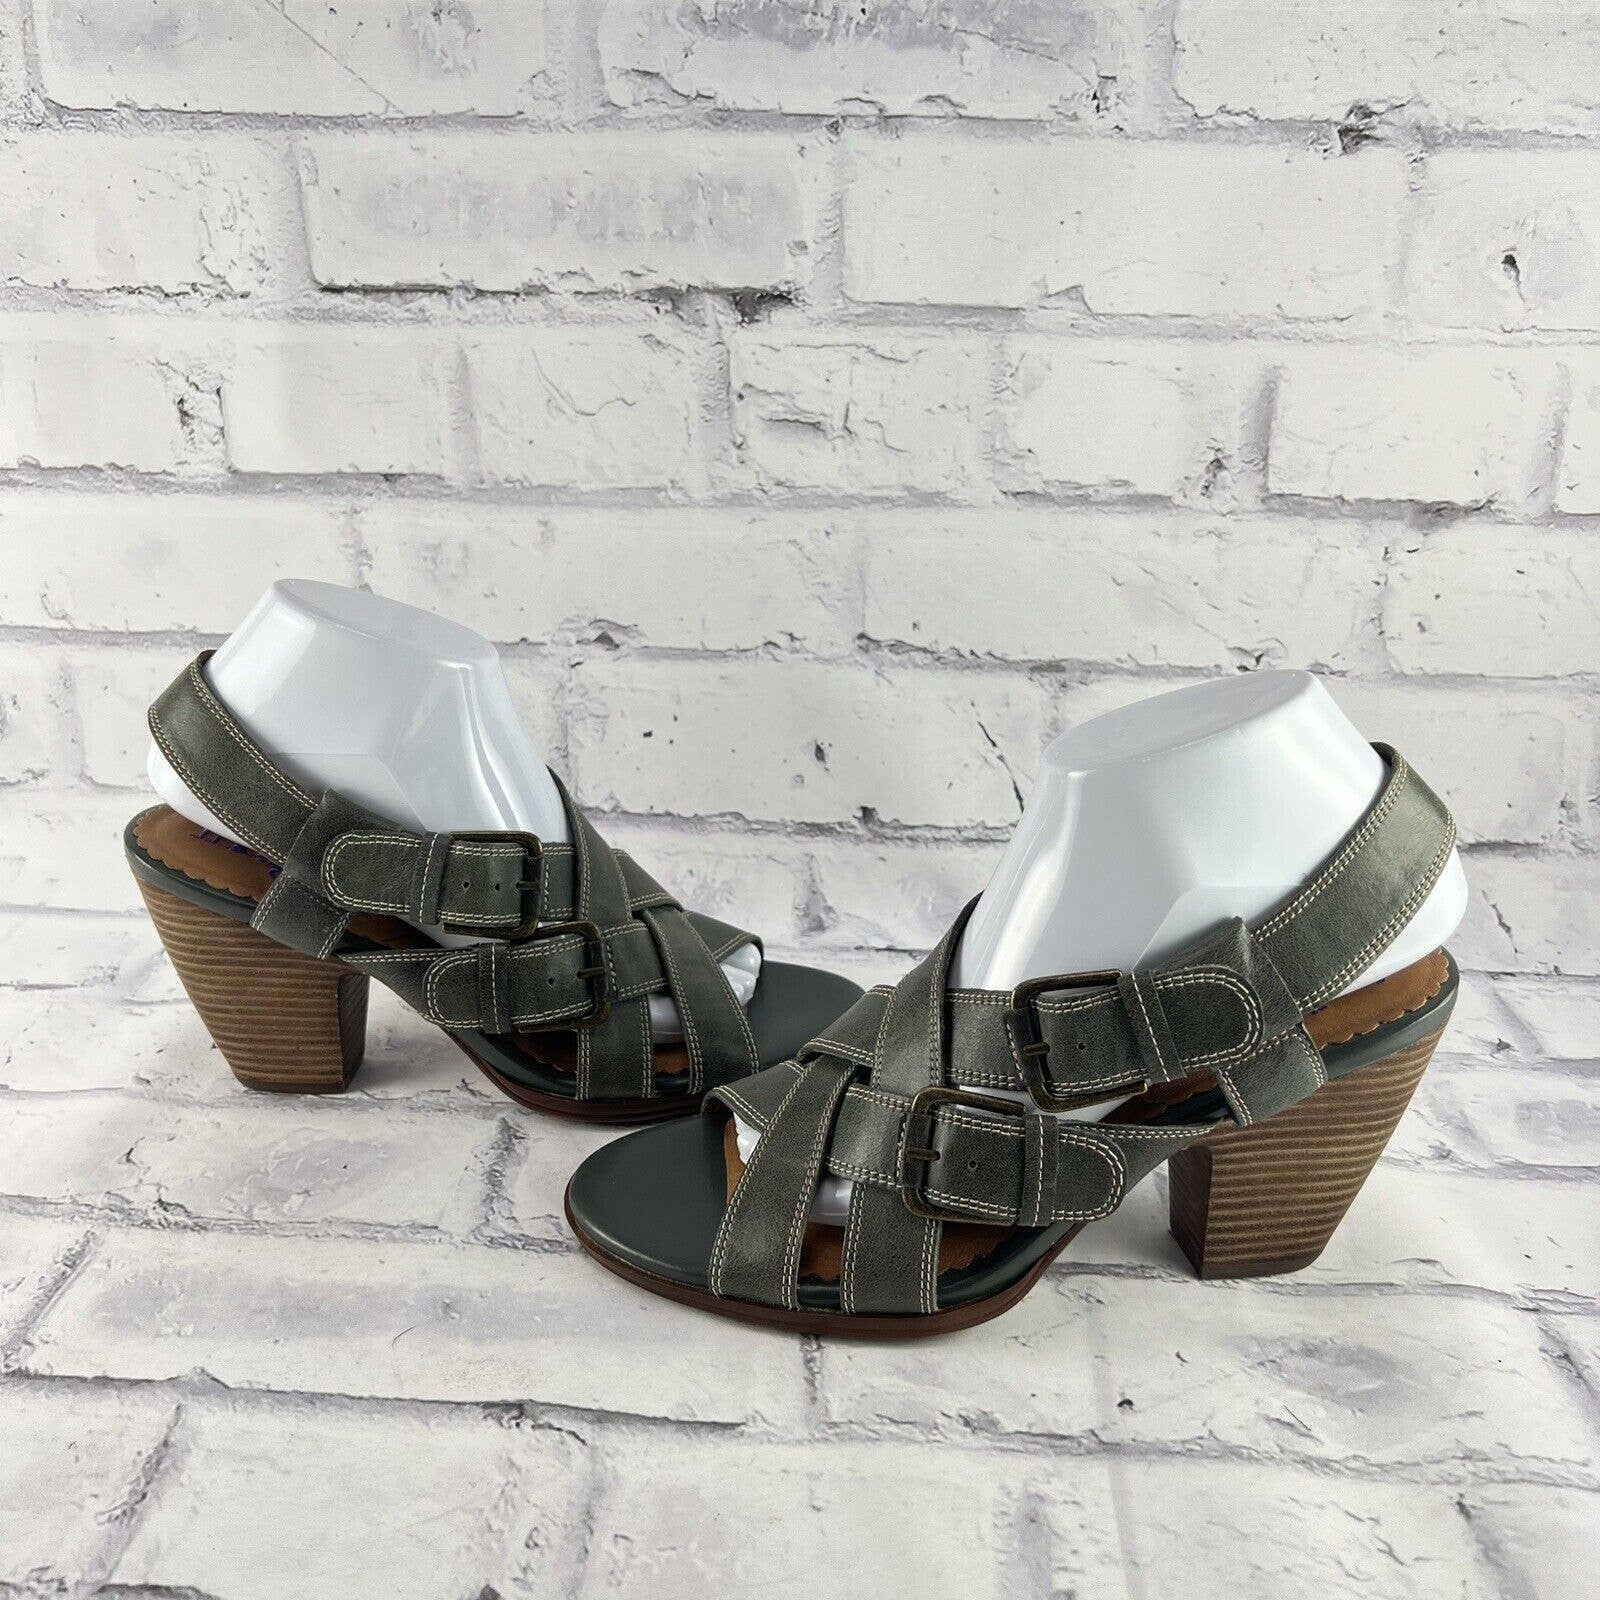 Indigo By Clarks Slingback Sandals Women’s 9 Strappy Double Buckle Green Leather